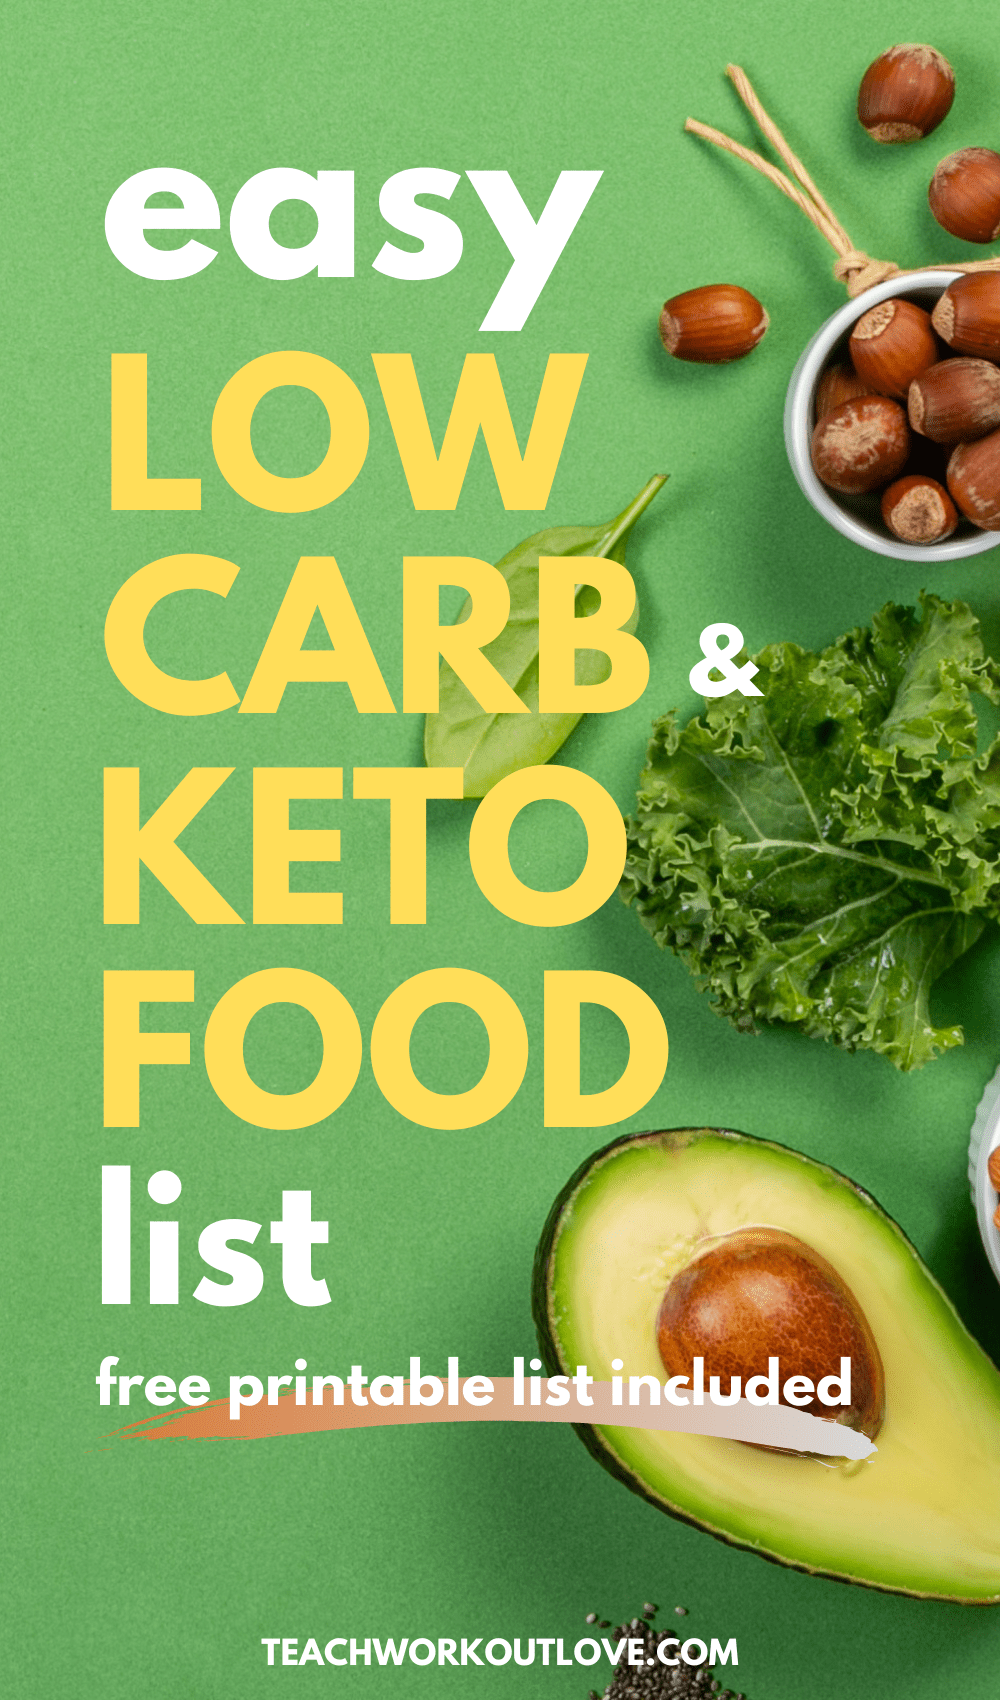 Balance and moderation are the keys dieting. Low carb and keto diets are on the rise this year.. Here's a great printable keto food list to get started!